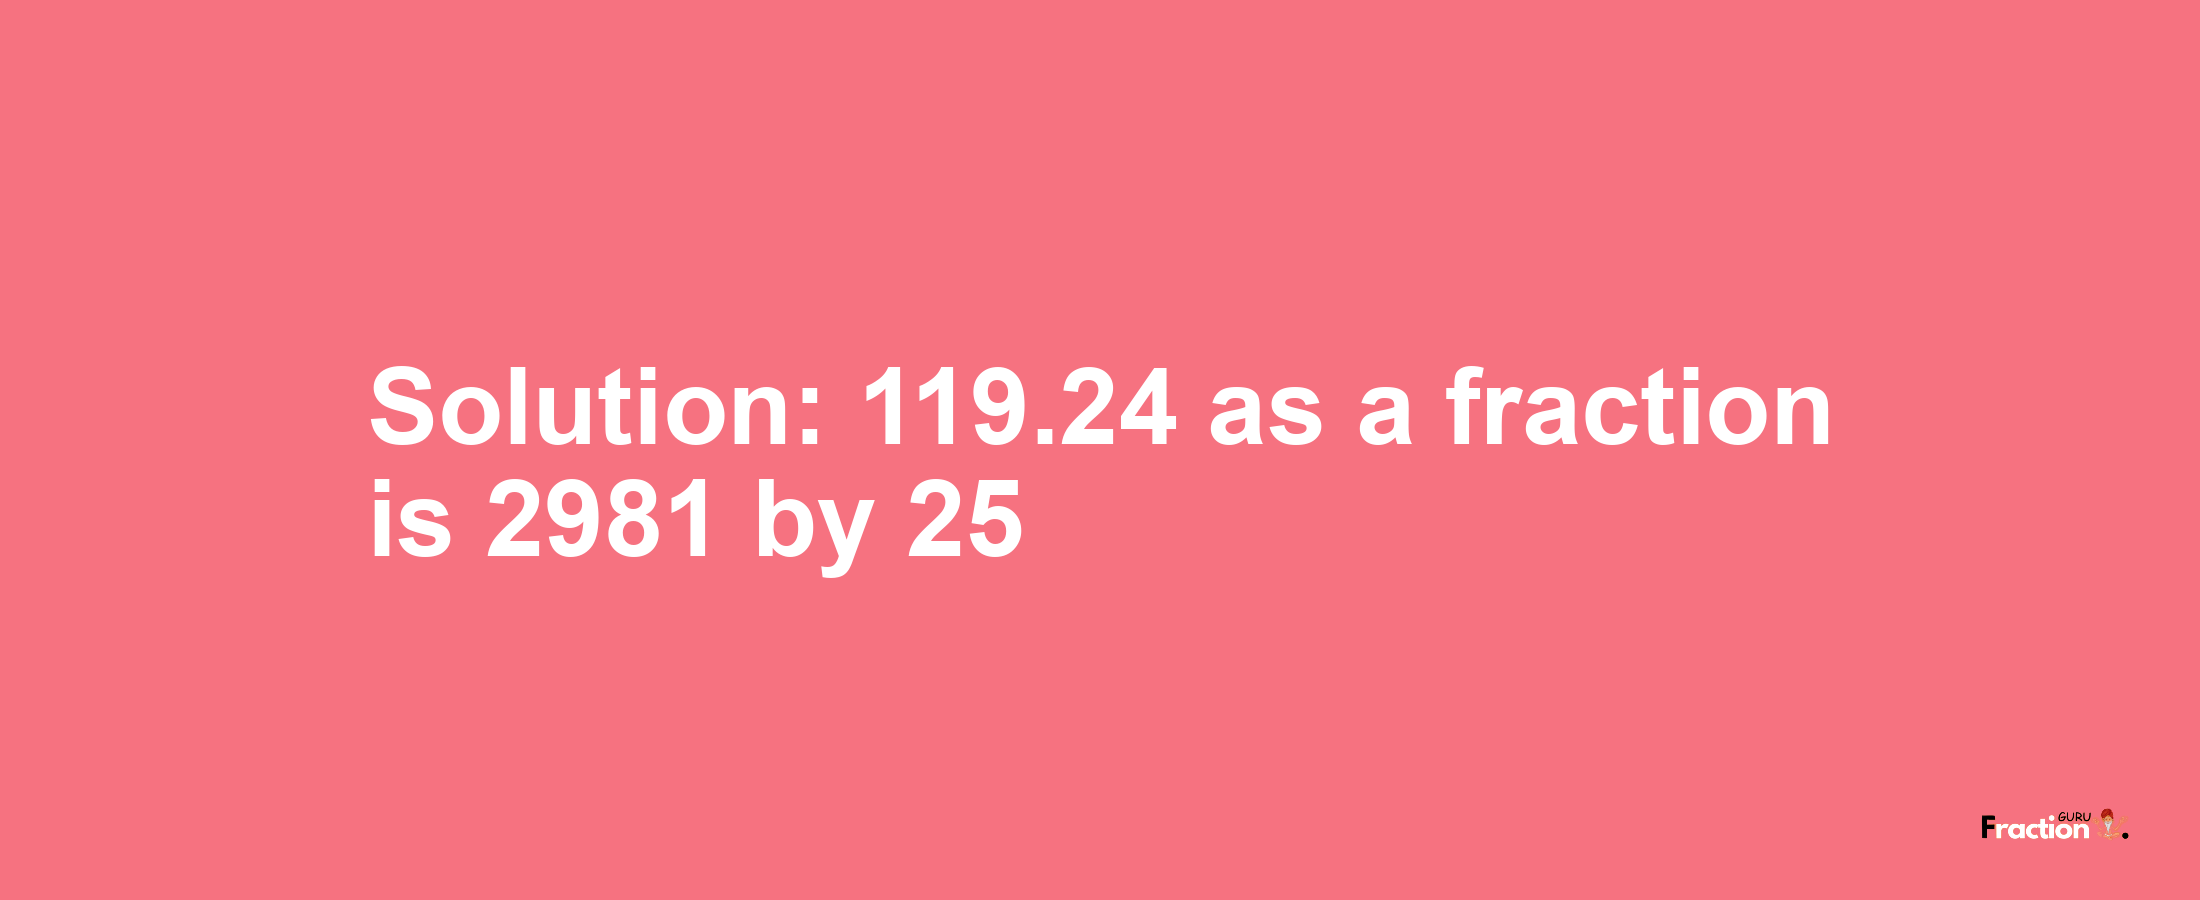 Solution:119.24 as a fraction is 2981/25